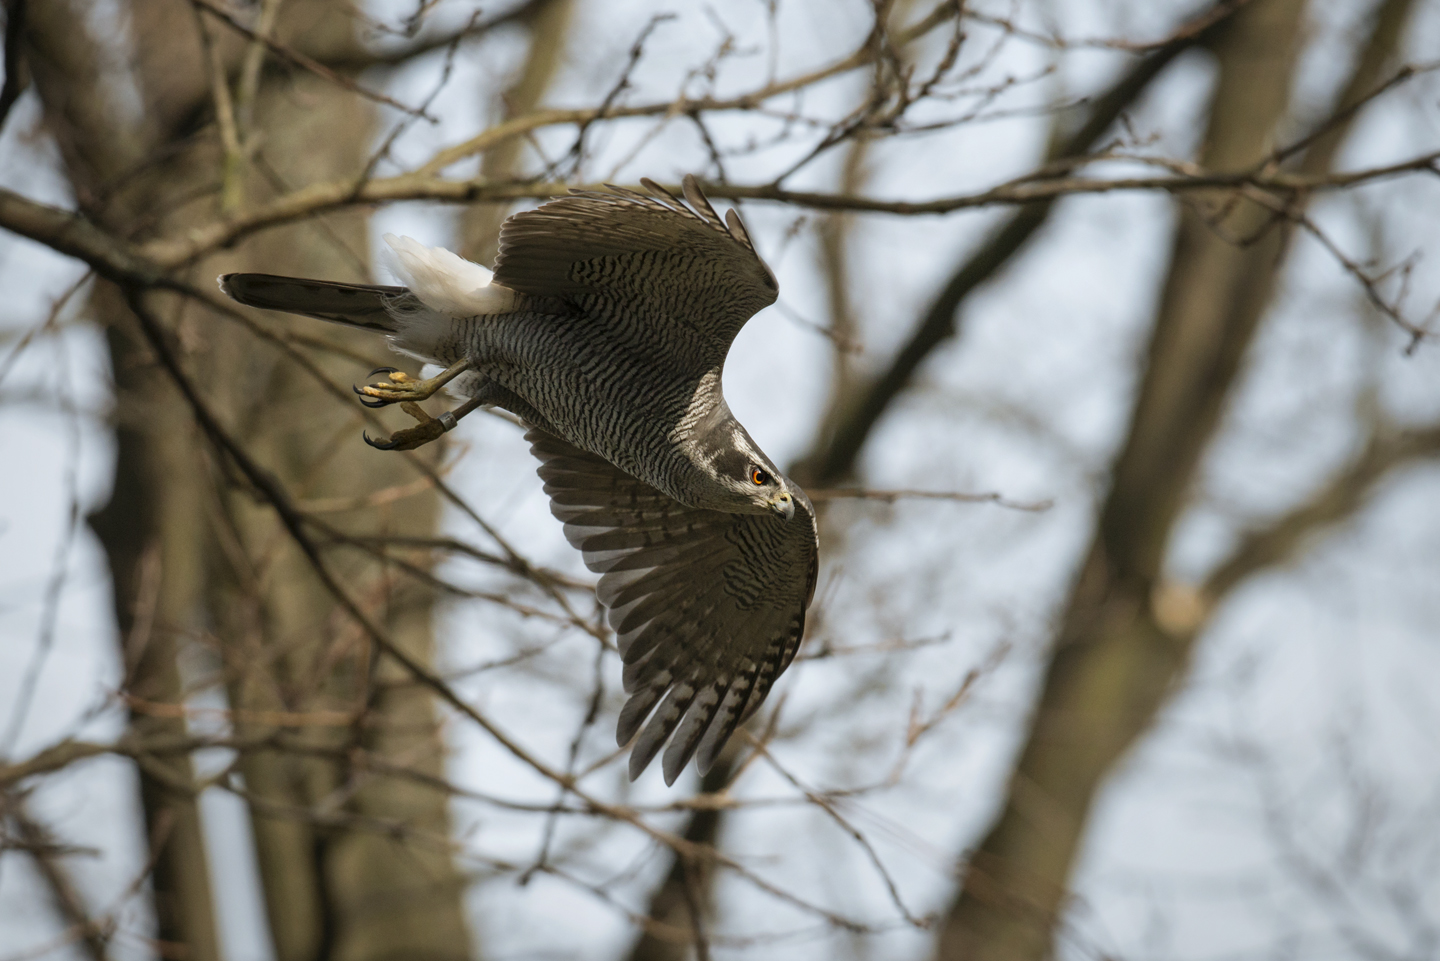  Feral pigeons and city rats are common prey, but kestrels, pet budgies and even long-eared owls are on the menu for this apex aerial predator 